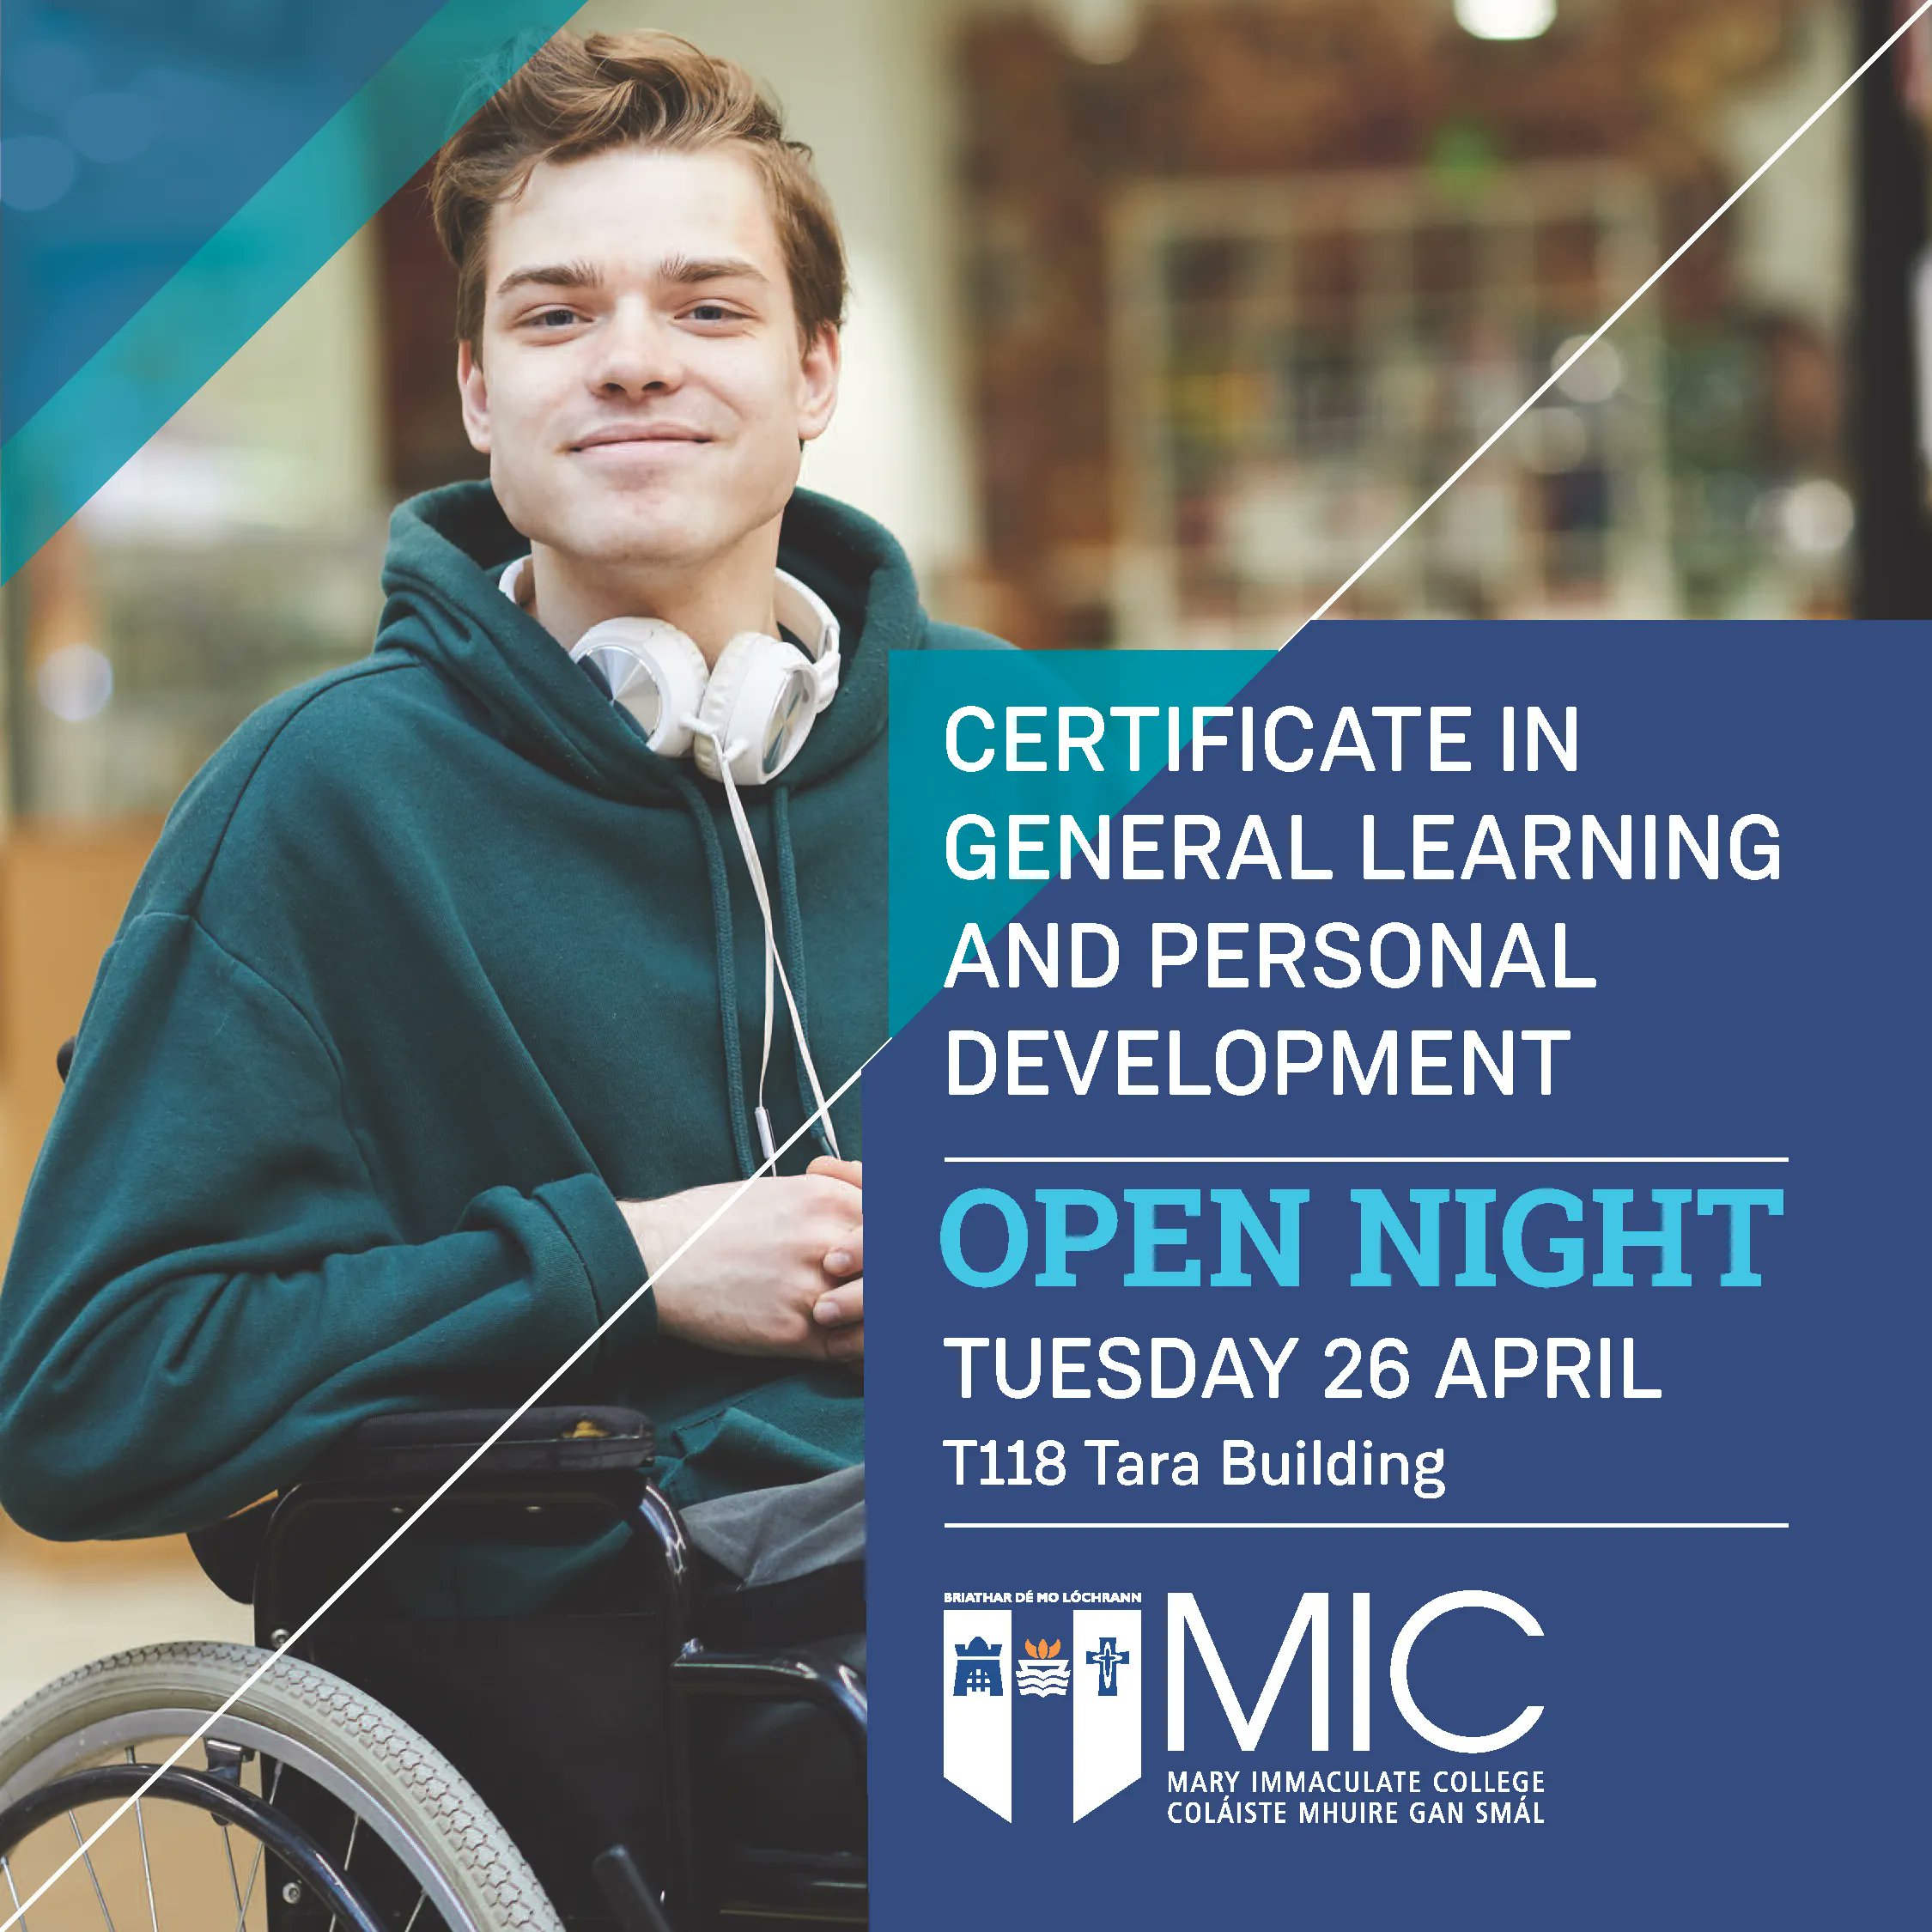 Open Night: Mary Immaculate College Limerick